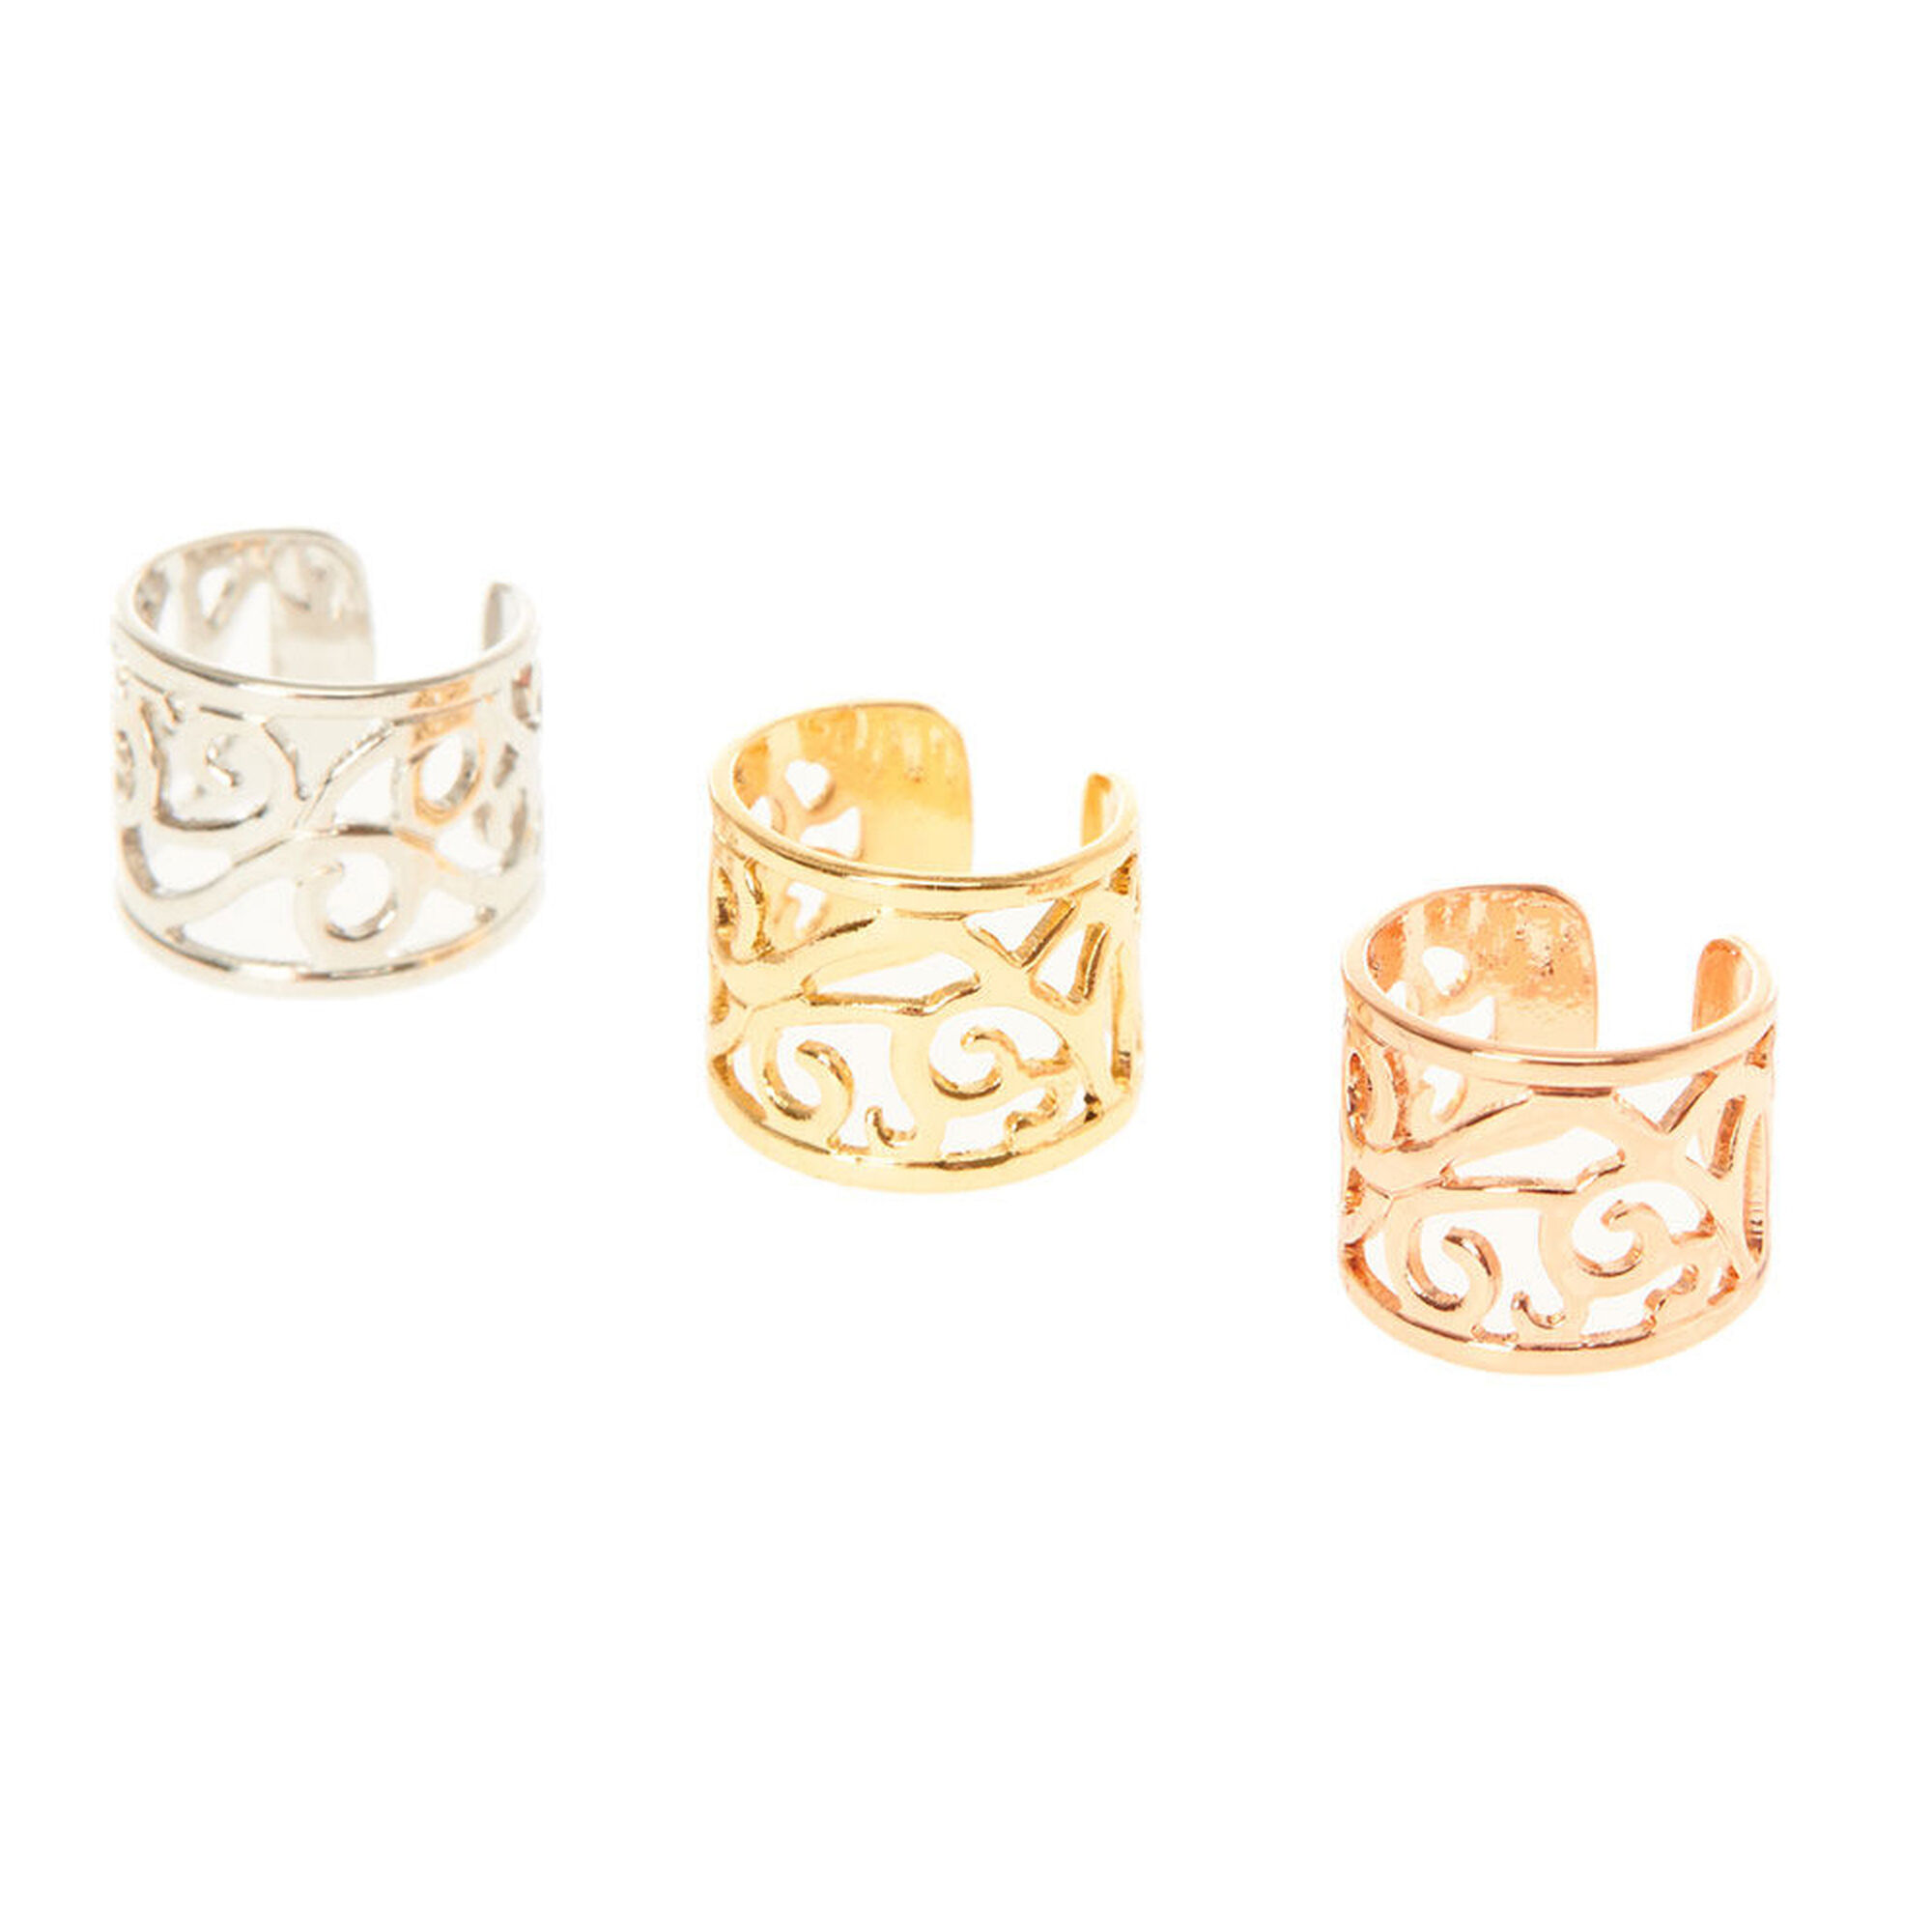 View Claires Mixed Metal Filigree Ear Cuffs 3 Pack Rose Gold information